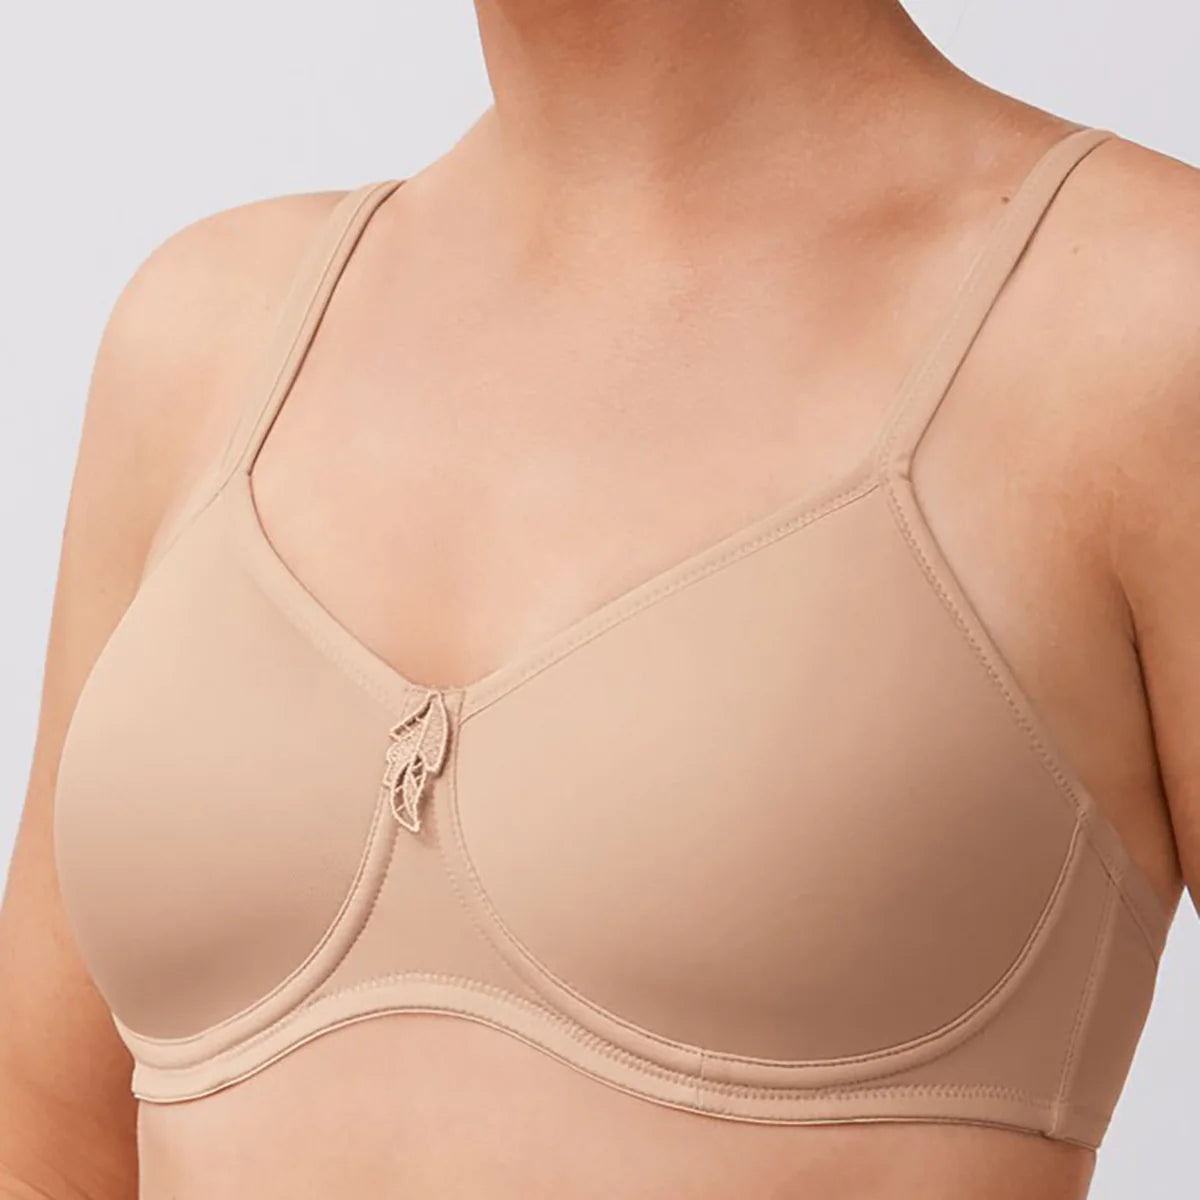 Maya Padded Soft Non-Wired Mastectomy Bra - (38D & 40C only!)